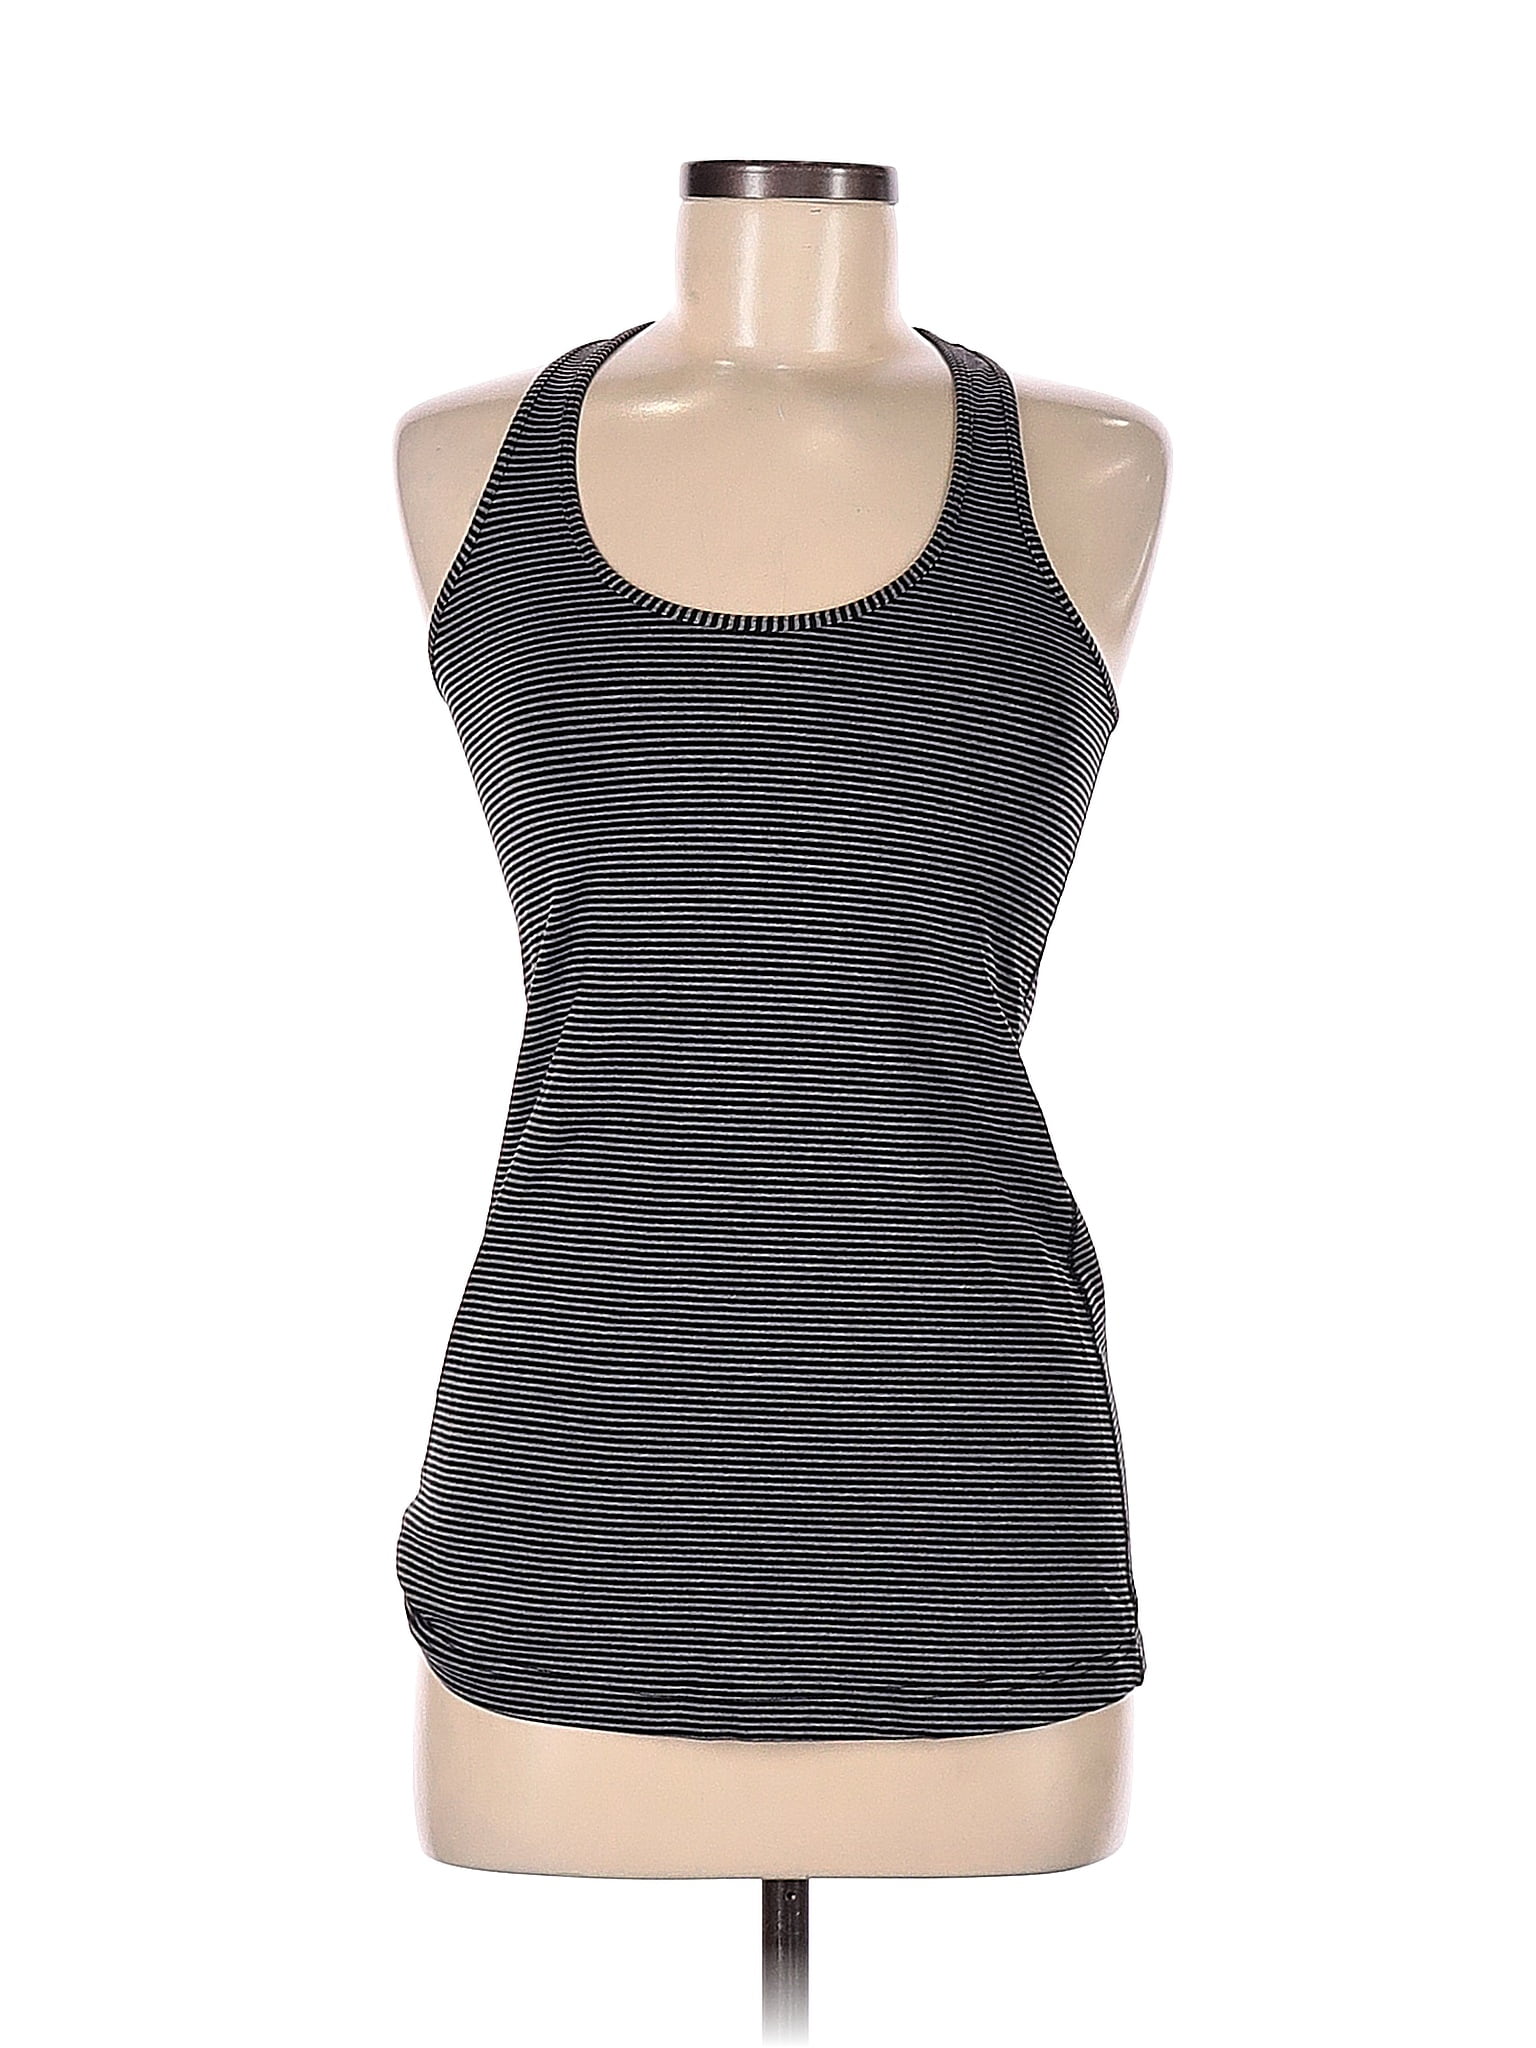 Pre-Owned Lululemon Athletica Womens Size 6 Active Iceland